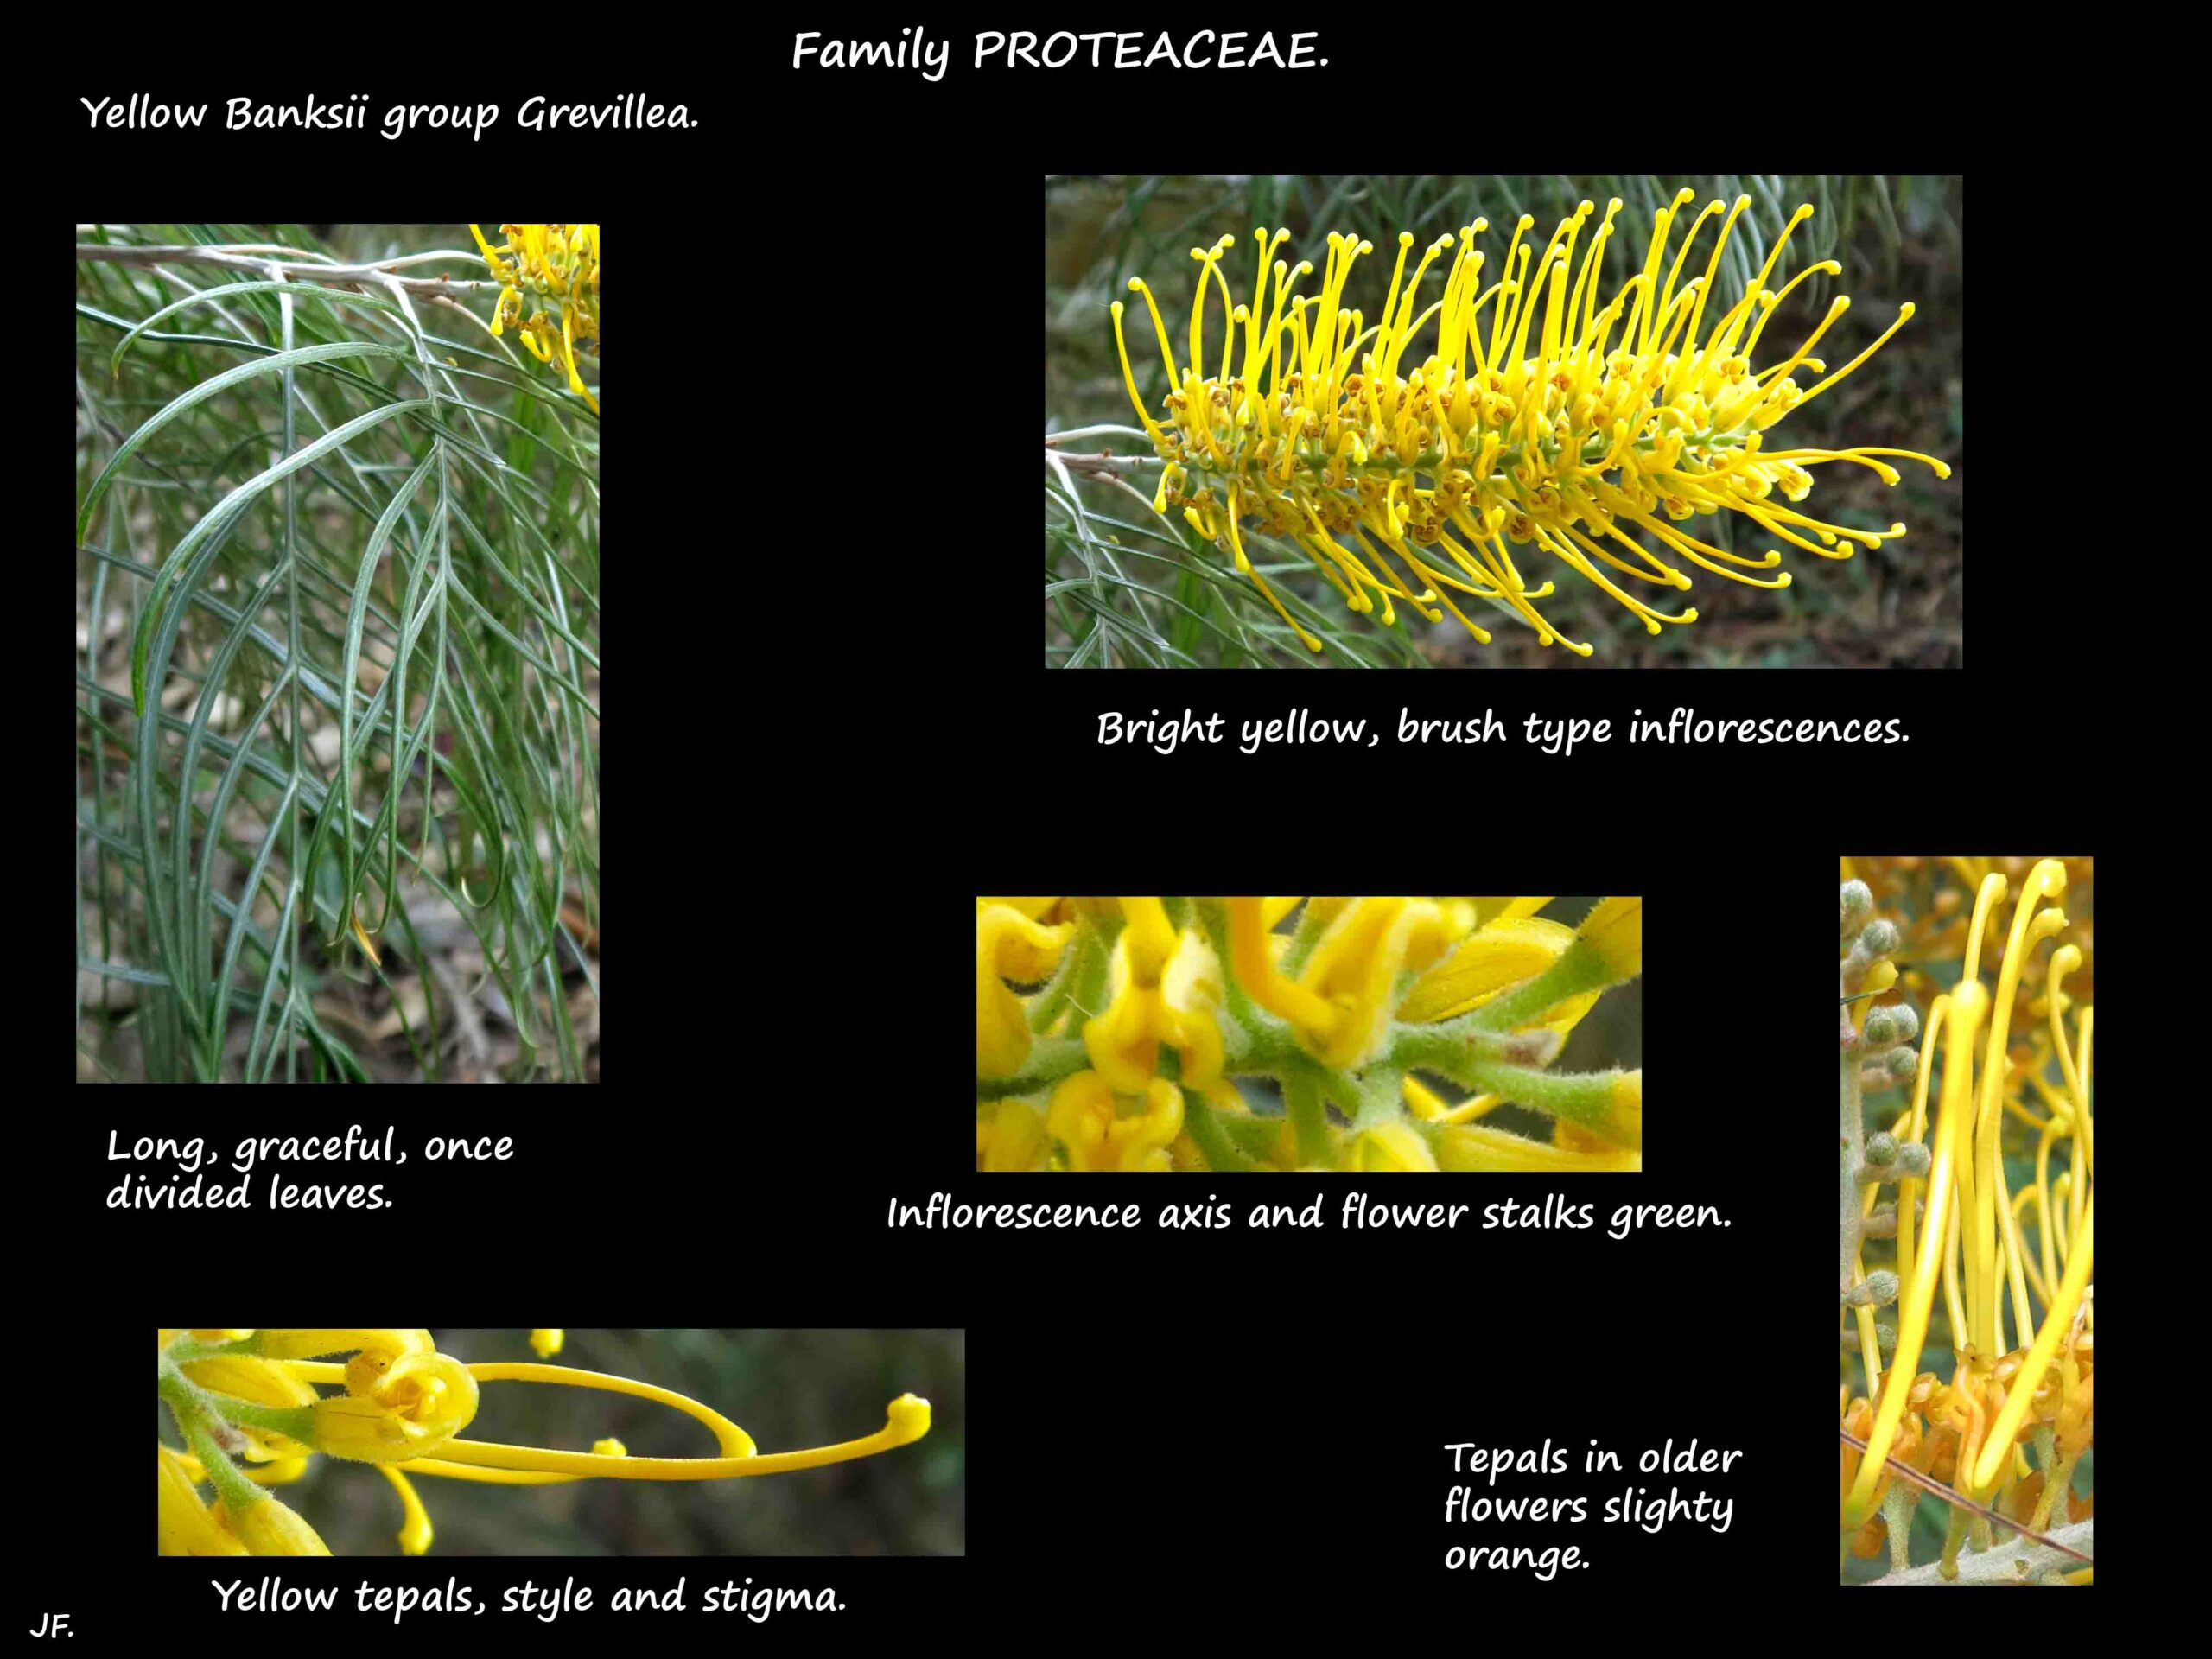 2 Grevillea with bright yellow flowers